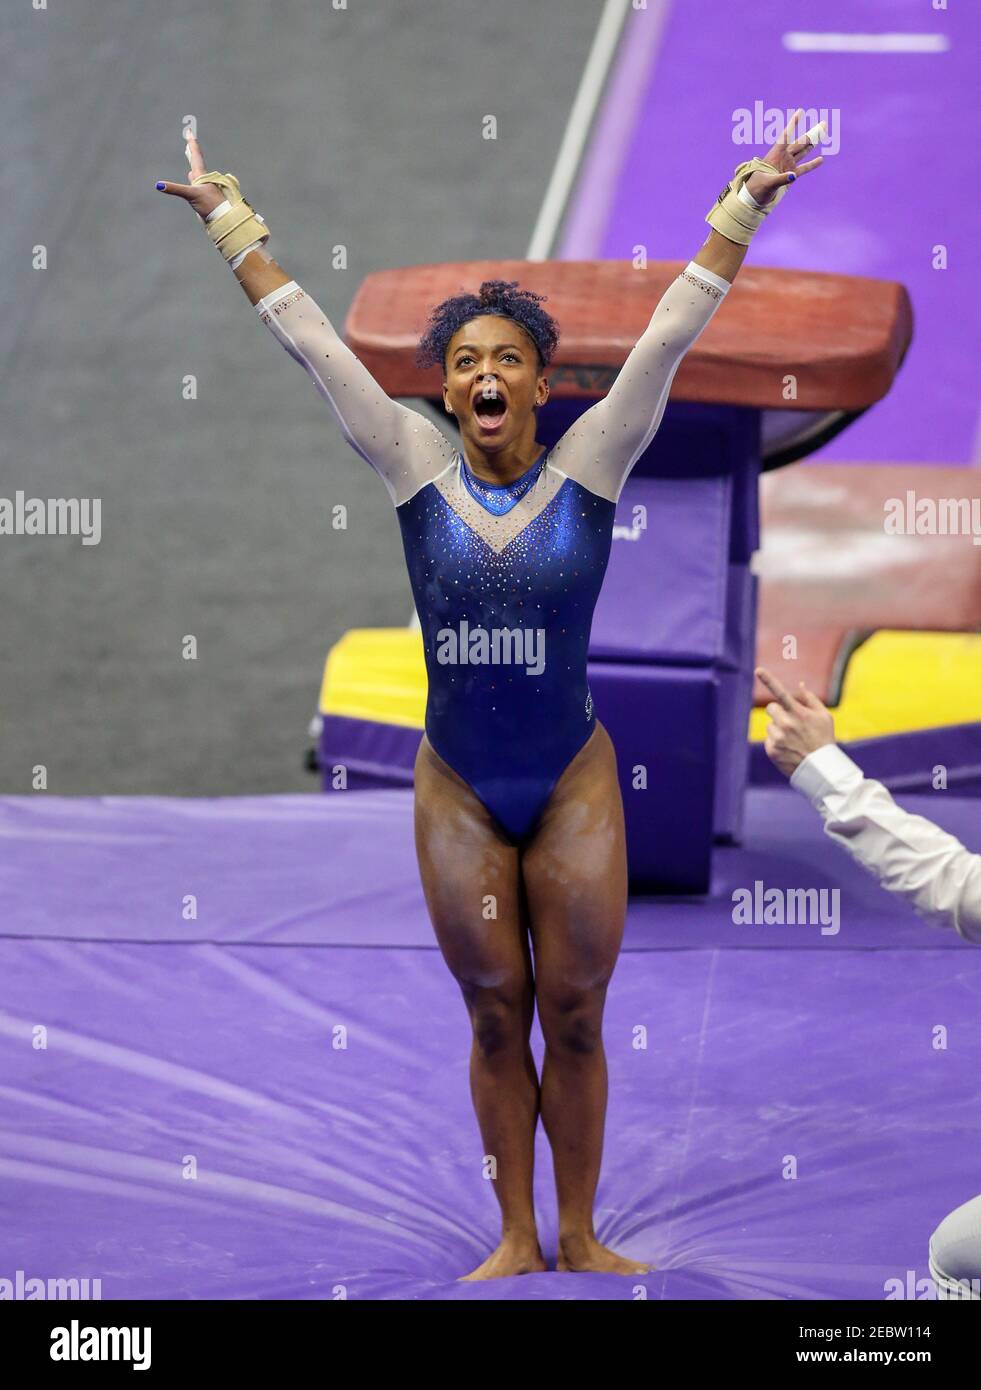 Baton Rouge, LA, USA. 22nd Jan, 2021. Florida's Trinity Thomas celebrates  after sticking the landing of her vault during NCAA Gymnastics action  between the #1 ranked Florida Gators and the #2 ranked